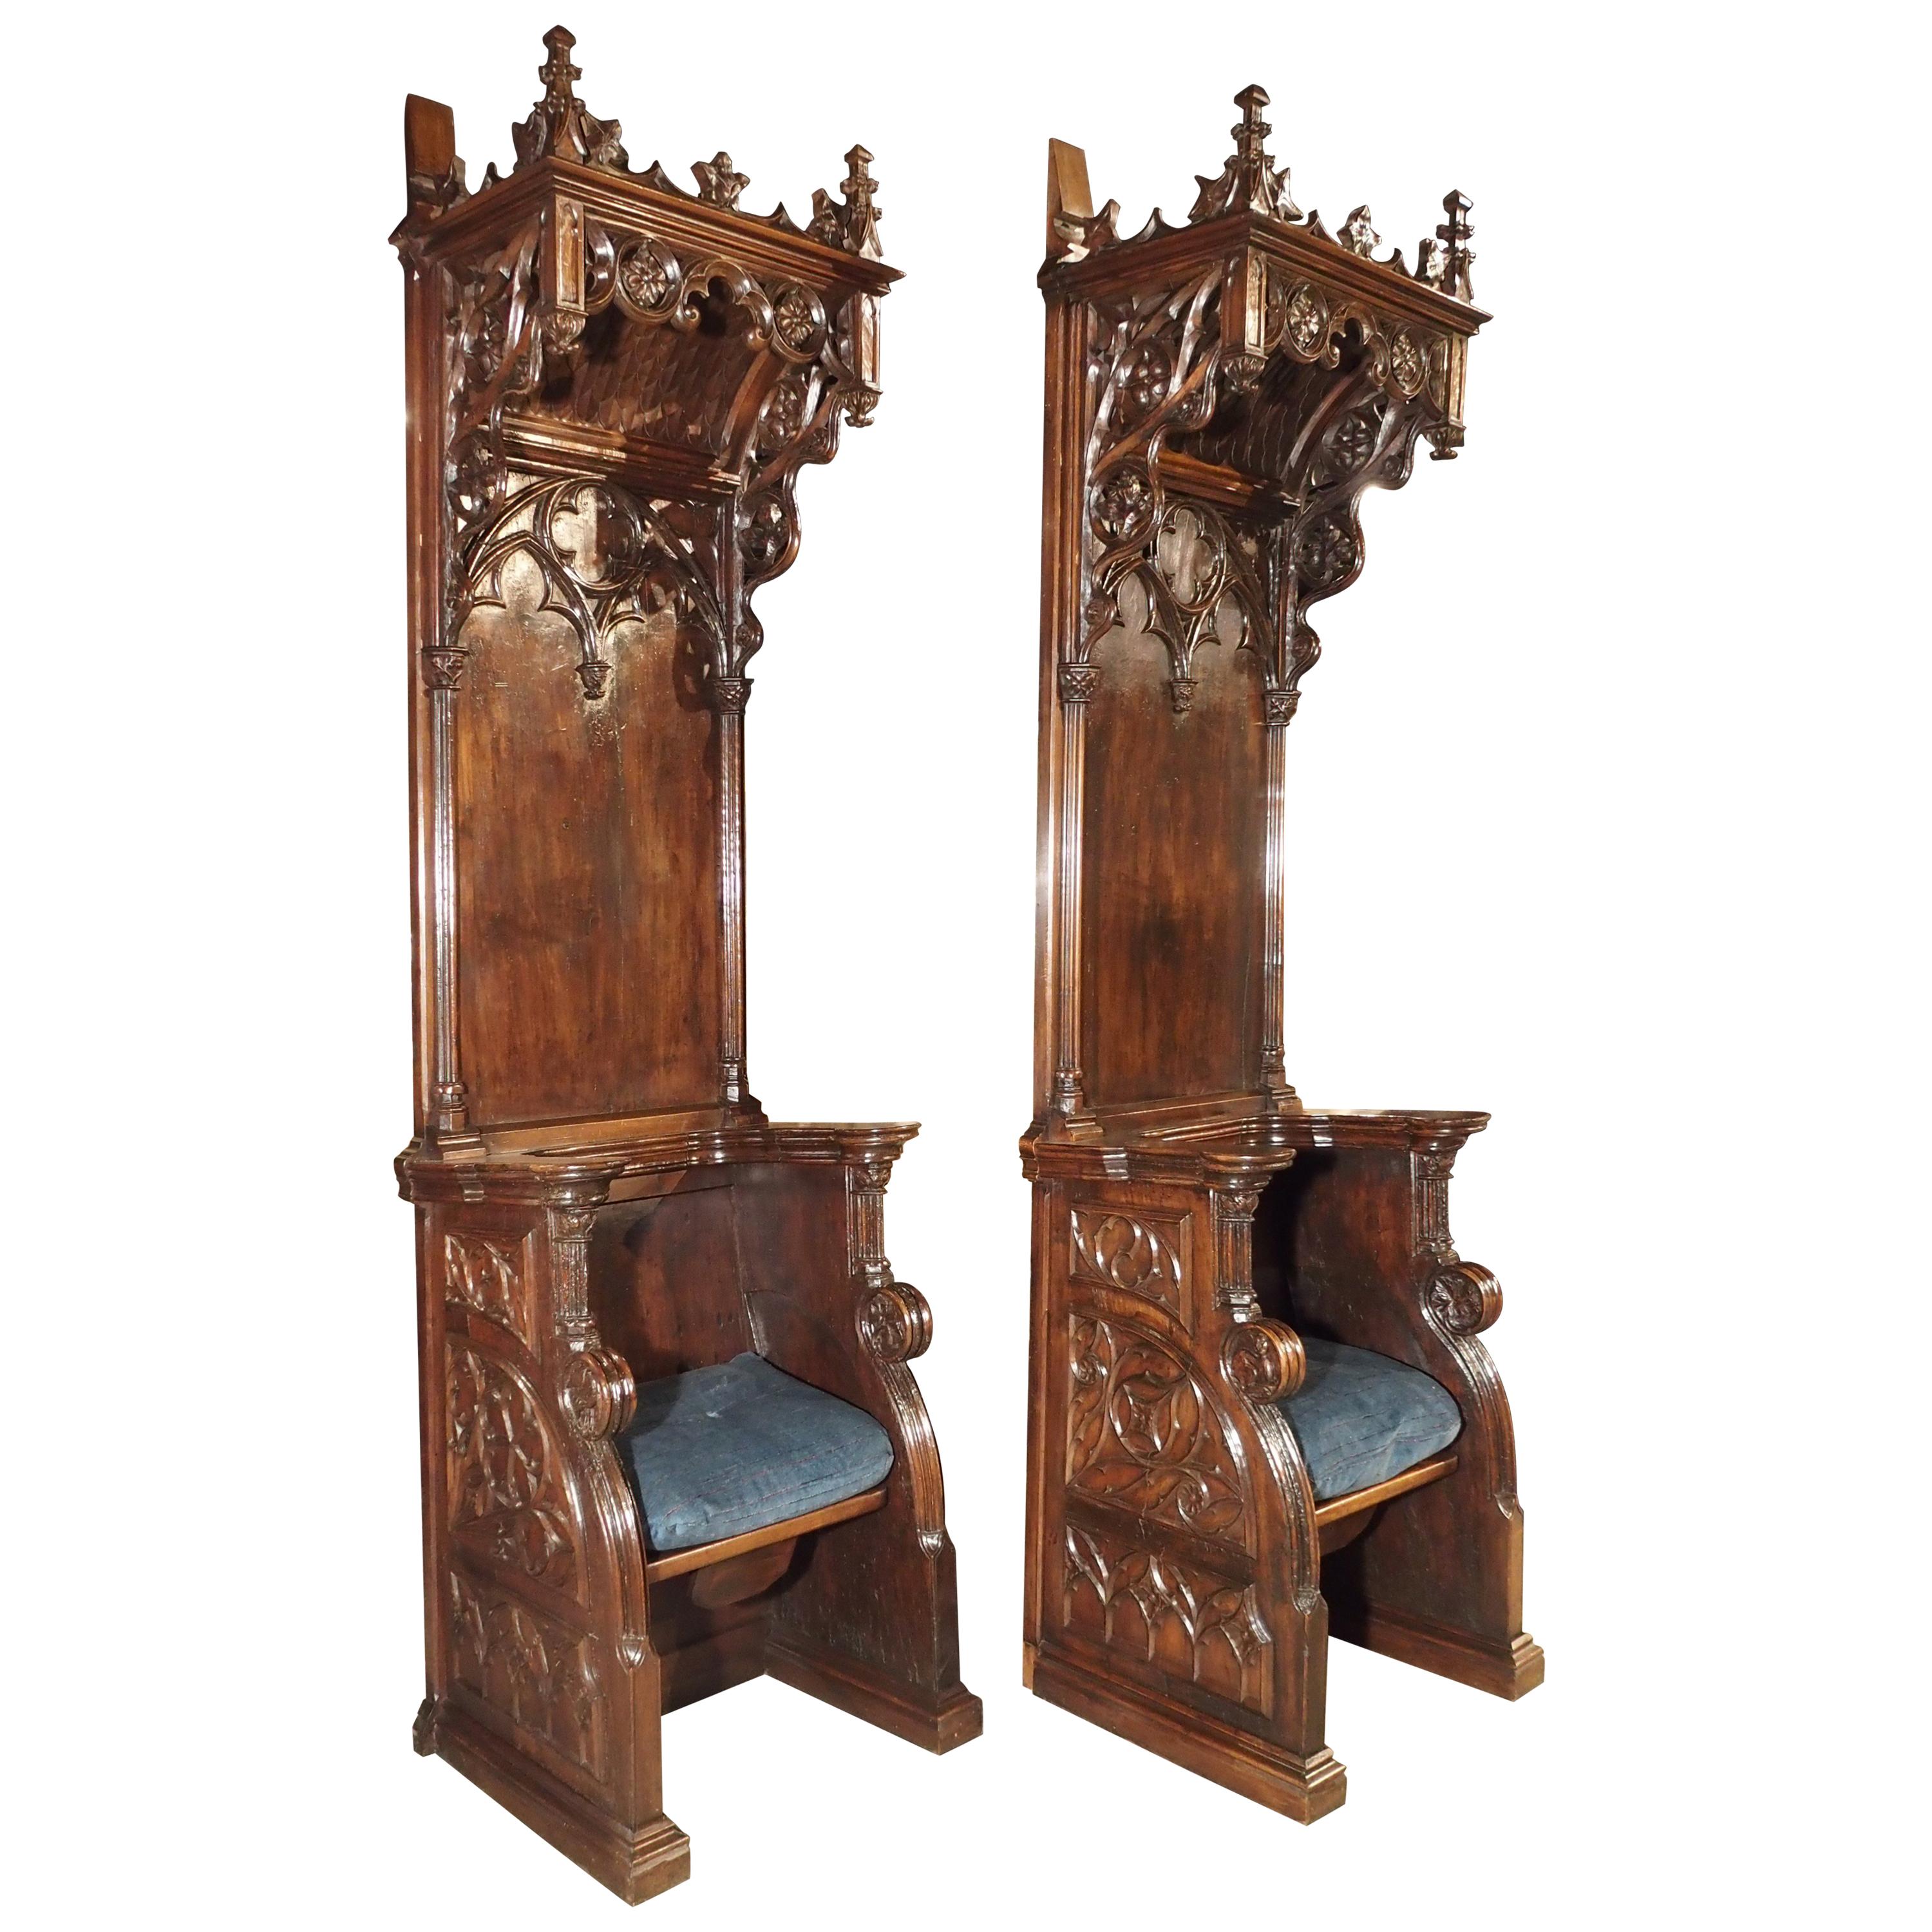 Rare Pair of Antique Gothic Walnut Wood Cathedral Chairs from France